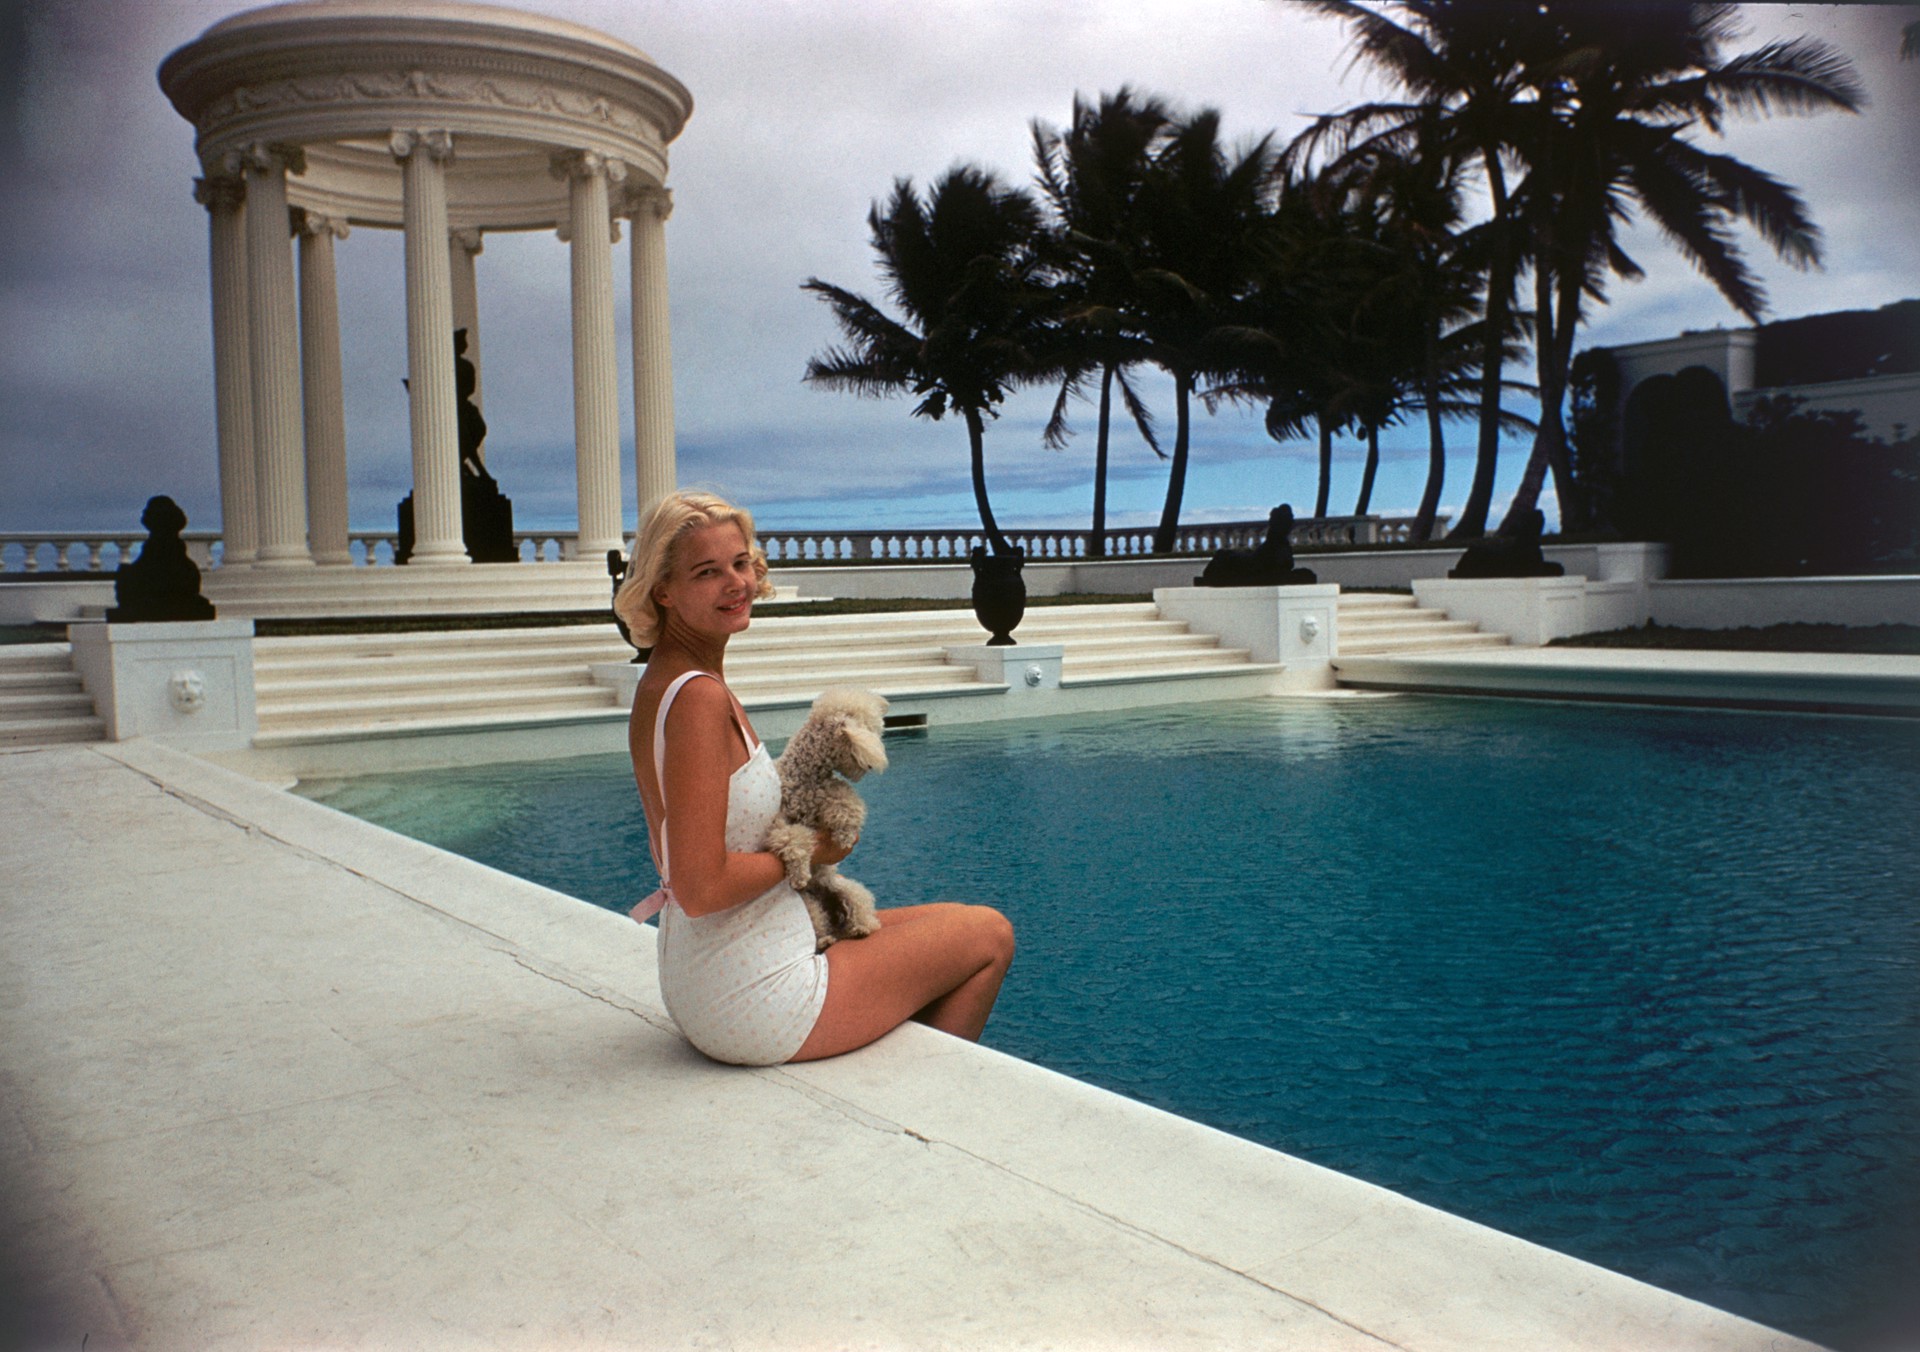 CZ By The Pool by Slim Aarons